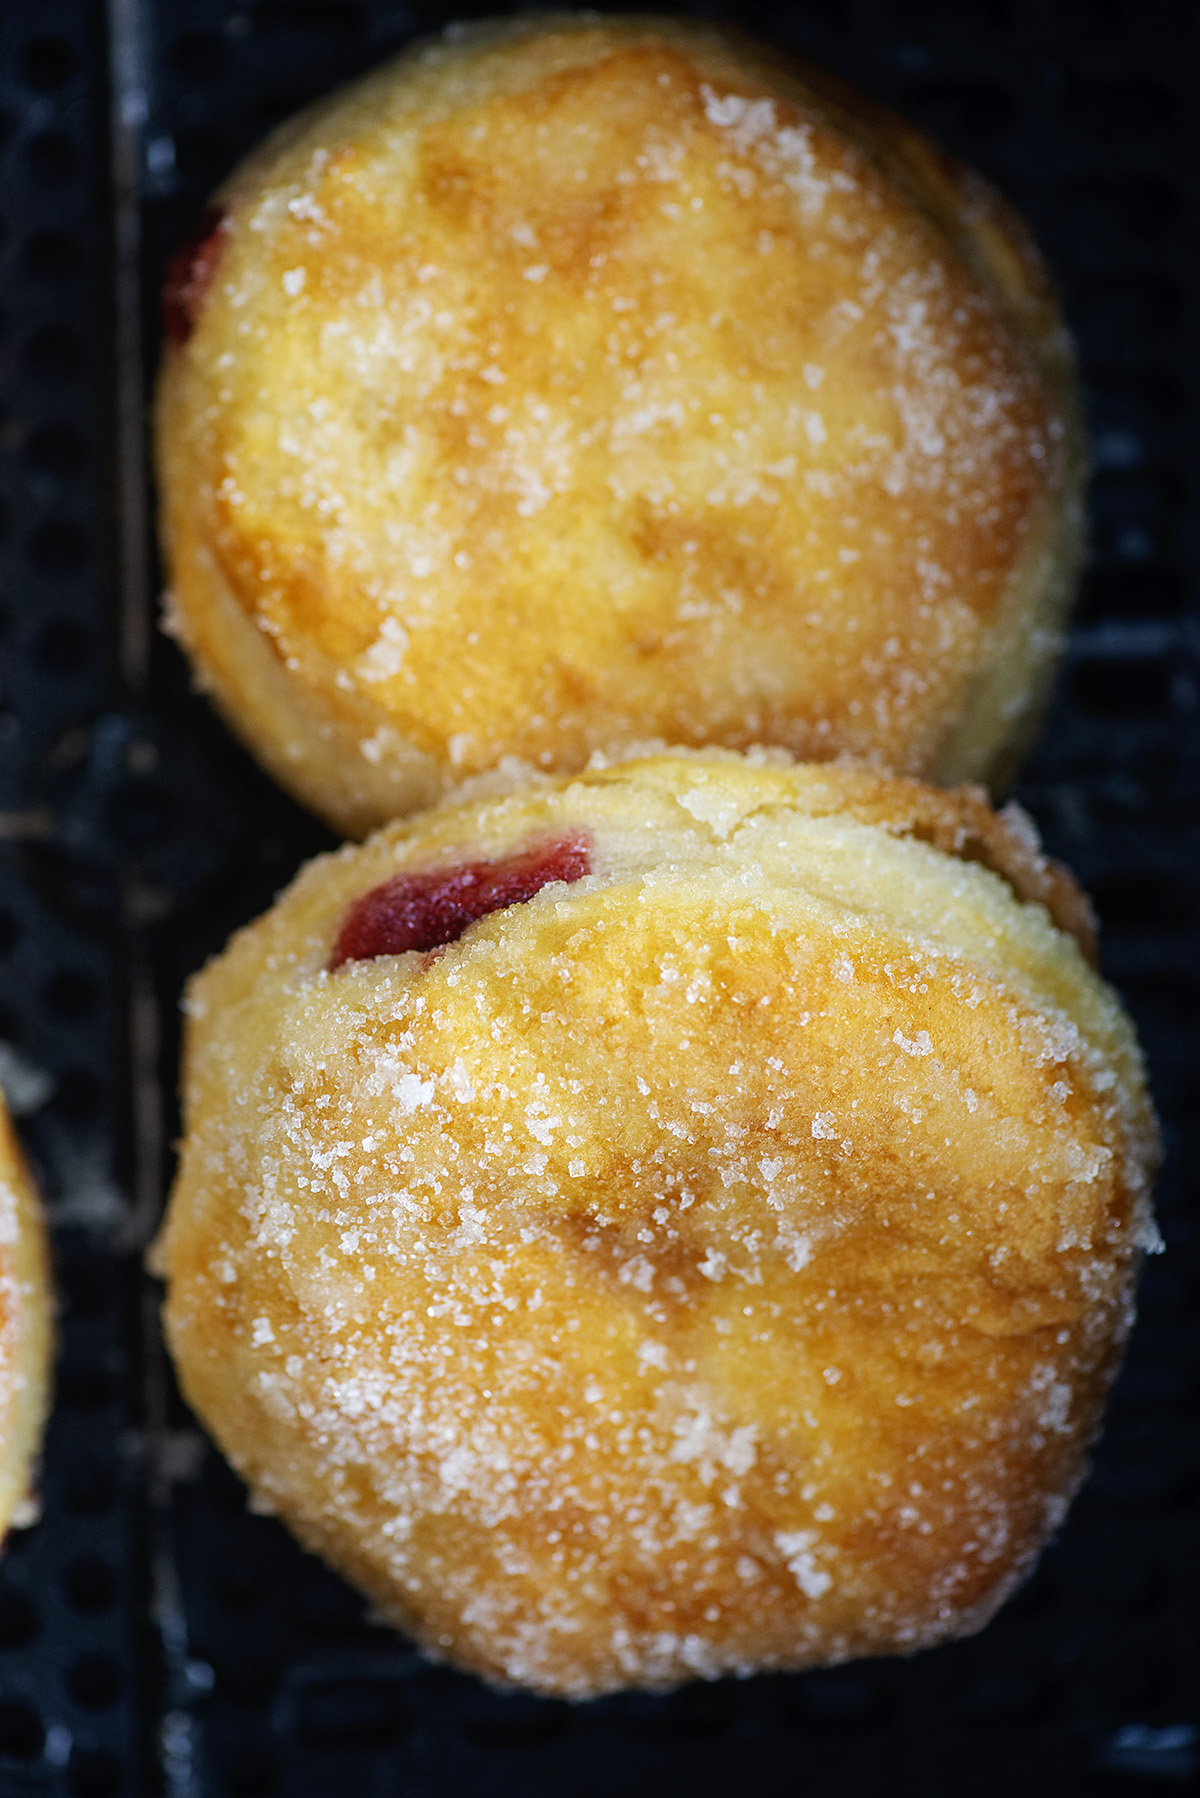 Two cooked jelly donuts in an air freyr basket.